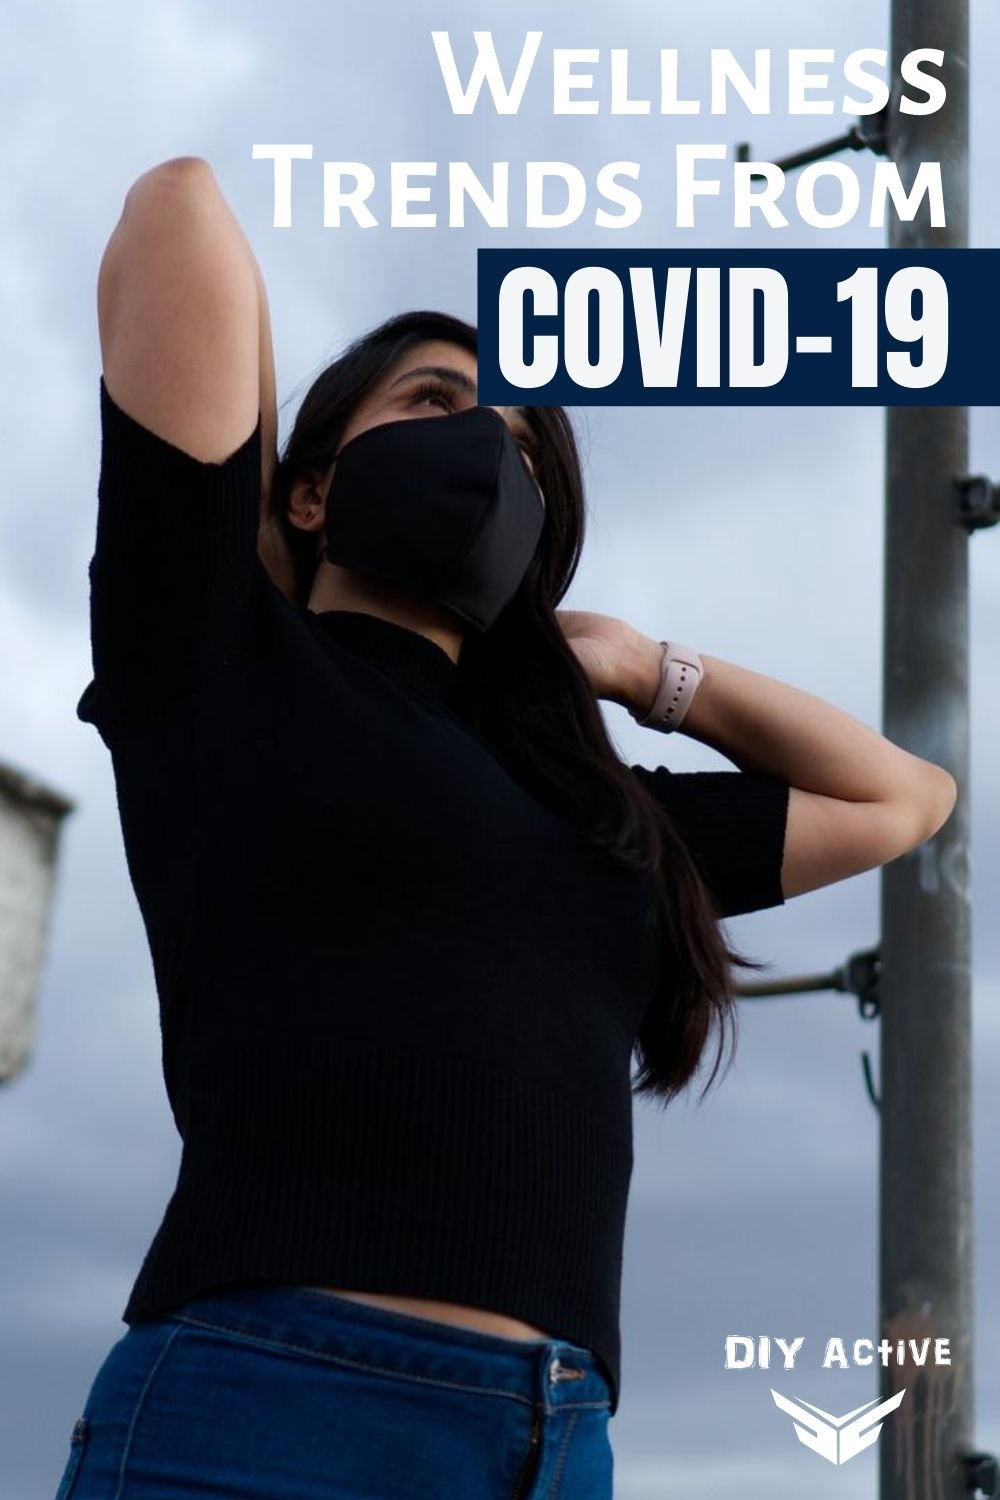 3 Top Wellness Trends Resulting From the COVID-19 Pandemic